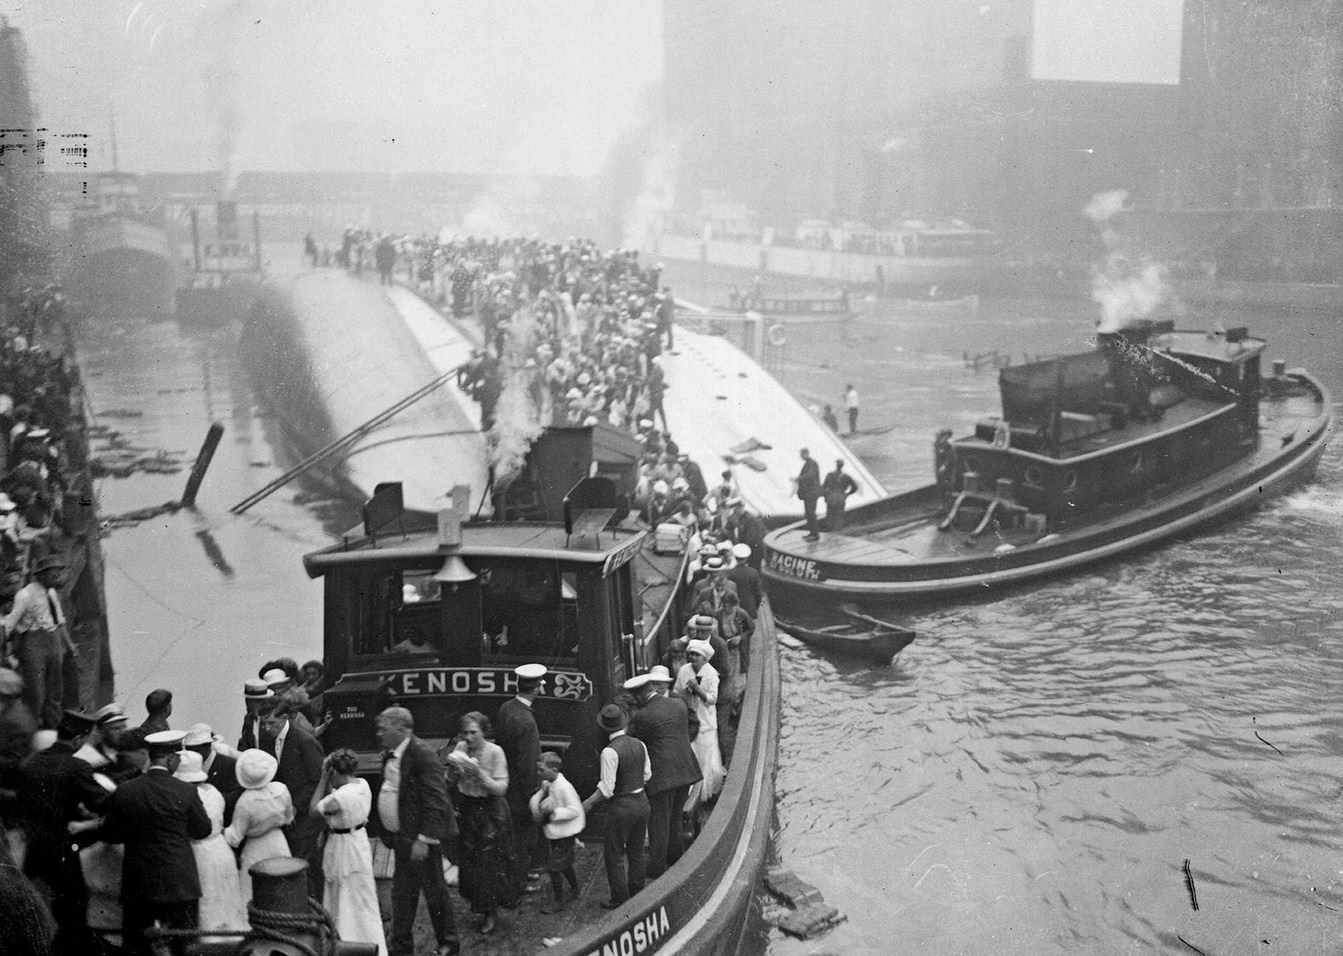 Eastland disaster, the Kenosha, a tugboat, rescuing survivors from the hull of the overturned steamer, Chicago, Illinois, July 24, 1915.